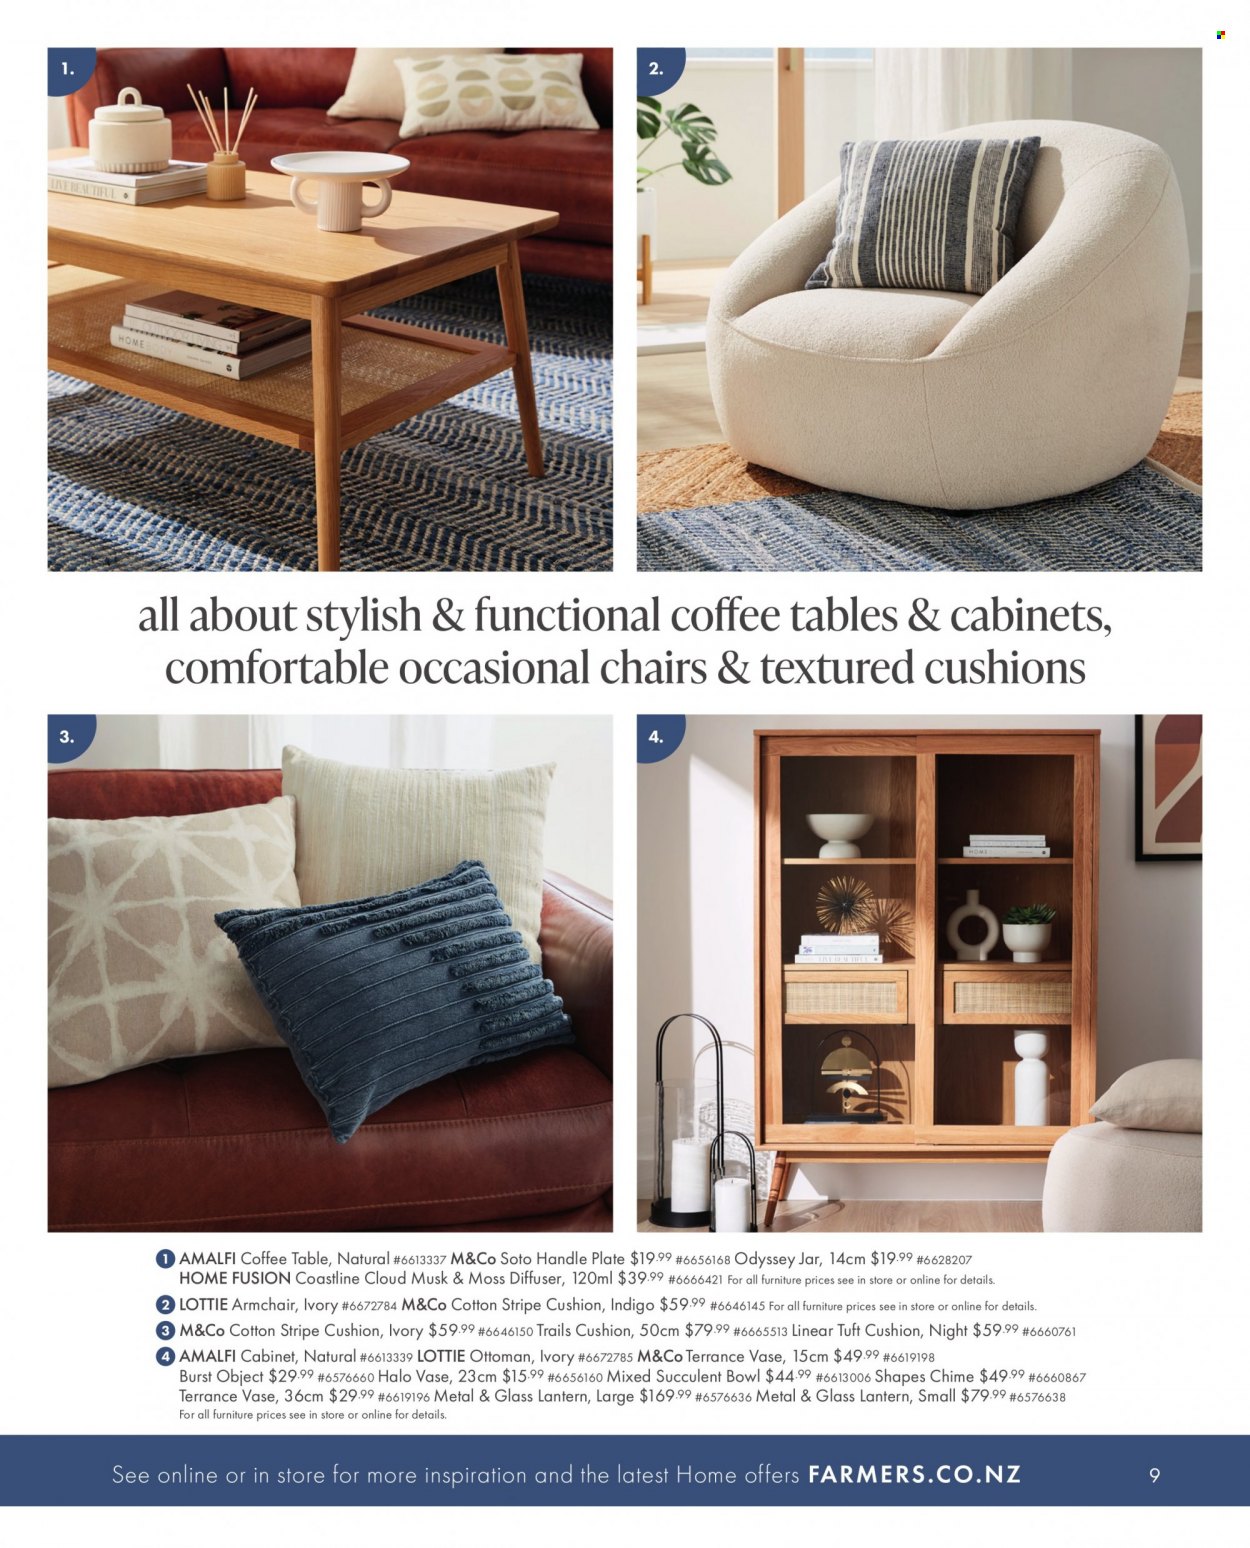 thumbnail - Farmers mailer - Sales products - plate, bowl, jar, diffuser, cushion, cabinet, table, chair, arm chair, coffee table, ottoman. Page 8.